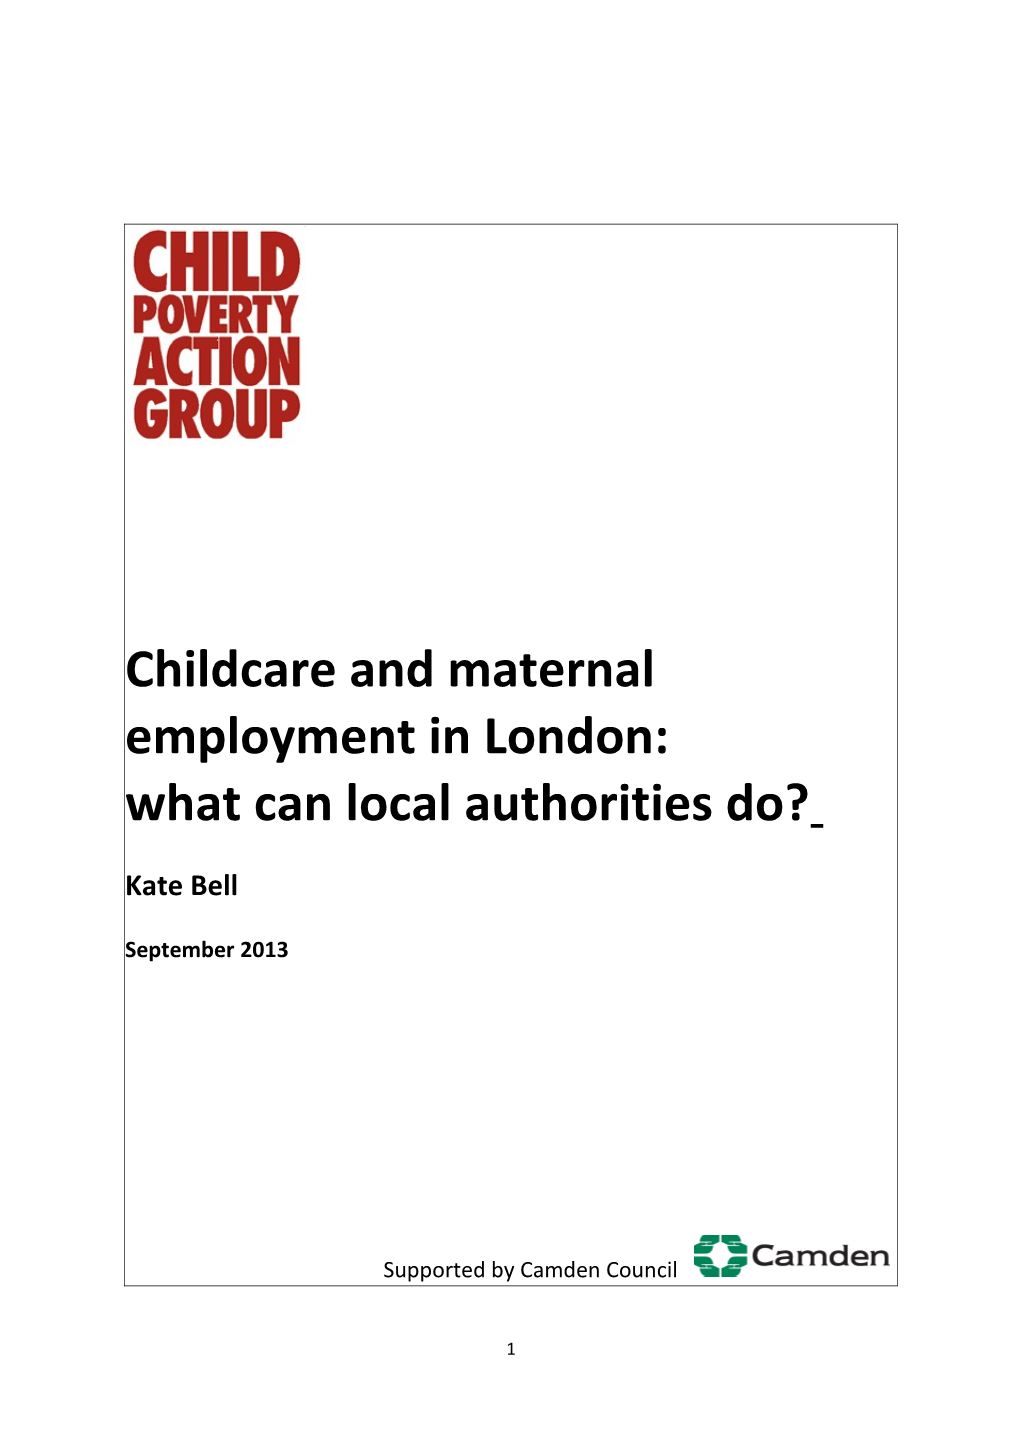 Childcare and Maternal Employment in Camden: a Report from CPAG to Camden Council and The